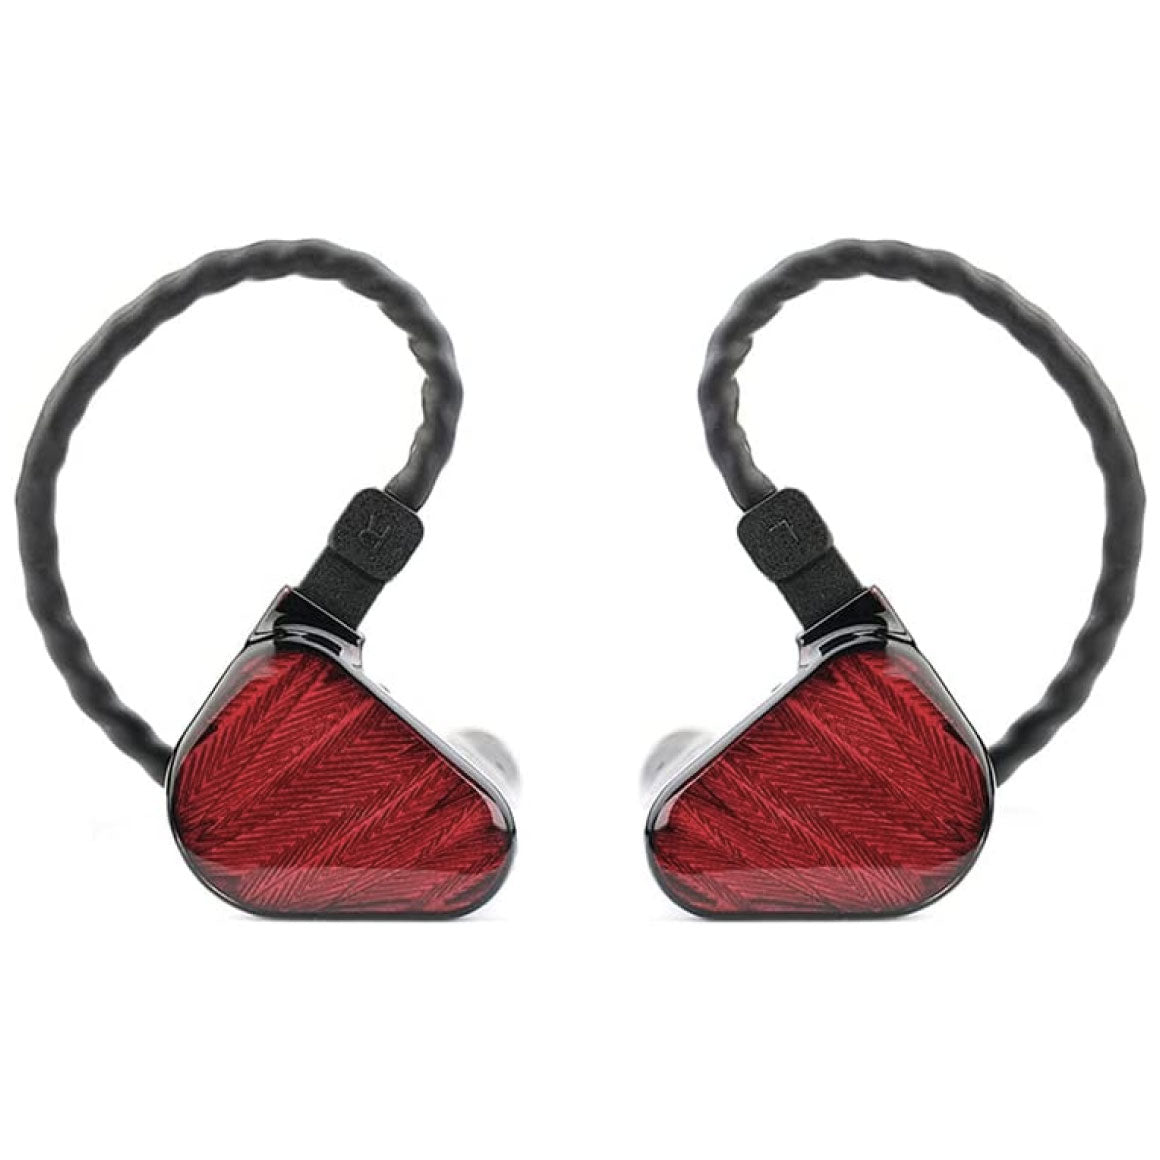 The New KZ ZS10 PRO X Universal IEM  Headphone Reviews and Discussion 